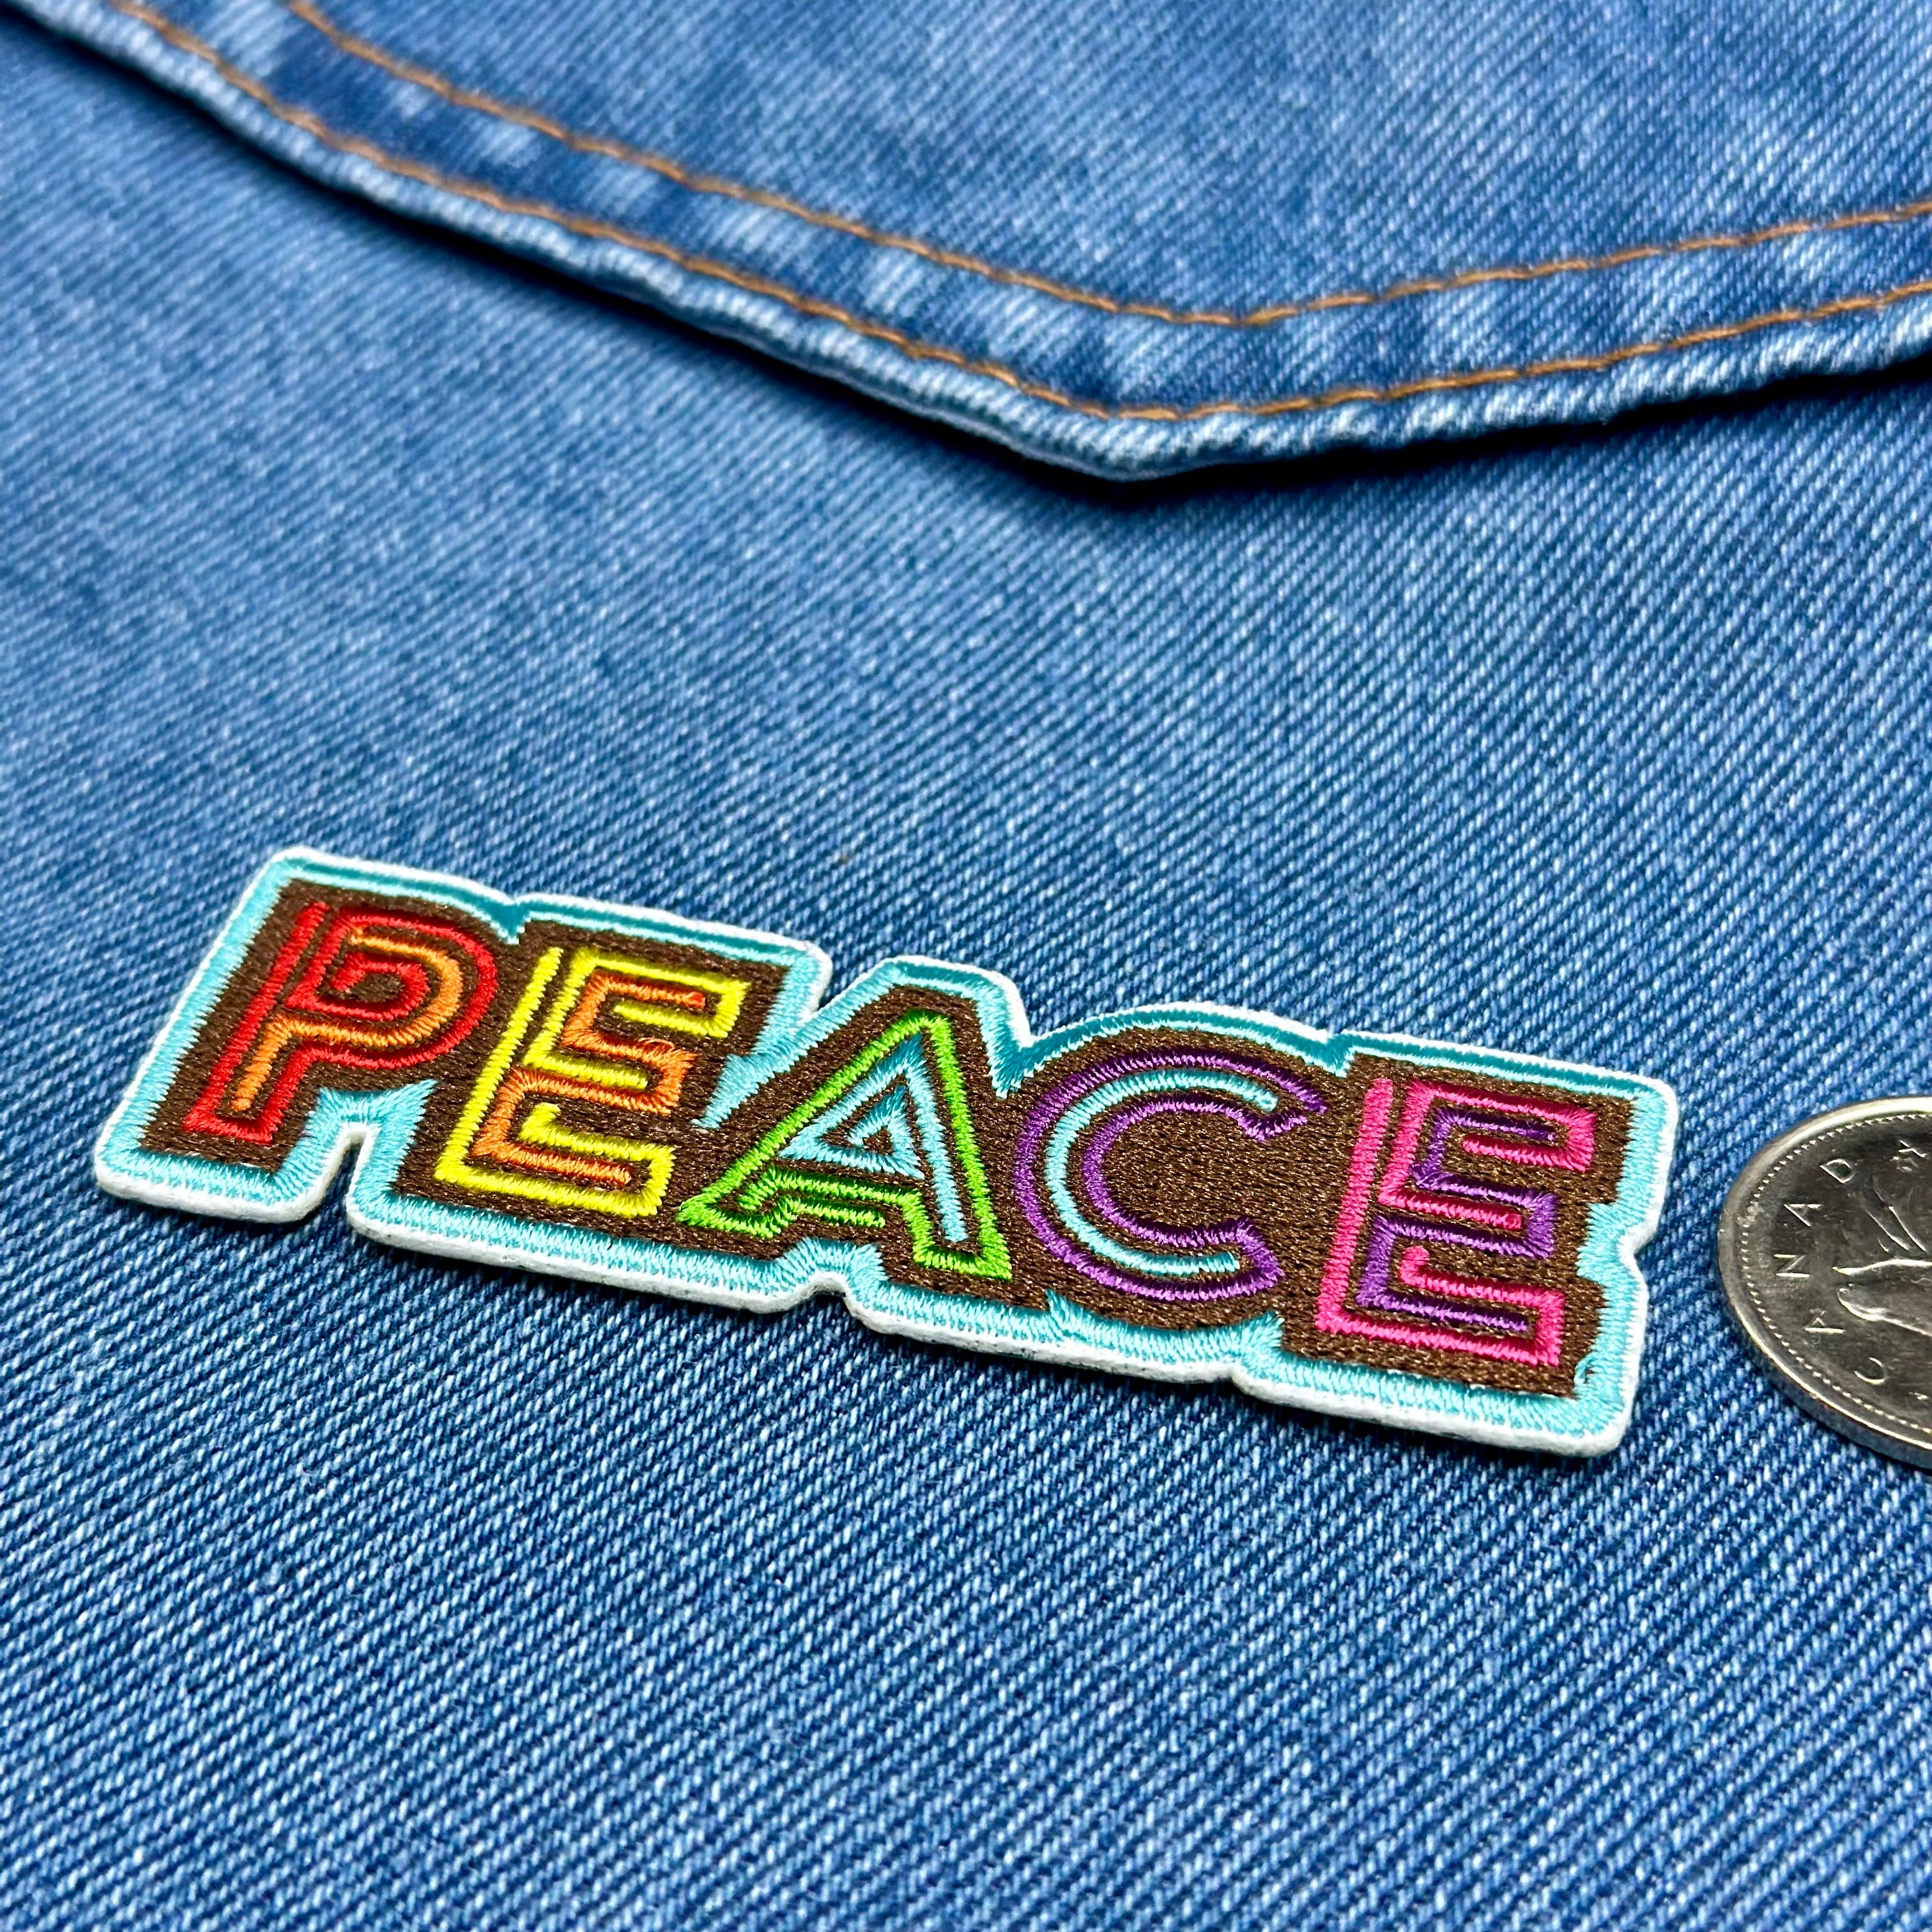 Iron On Patches - Peace Word